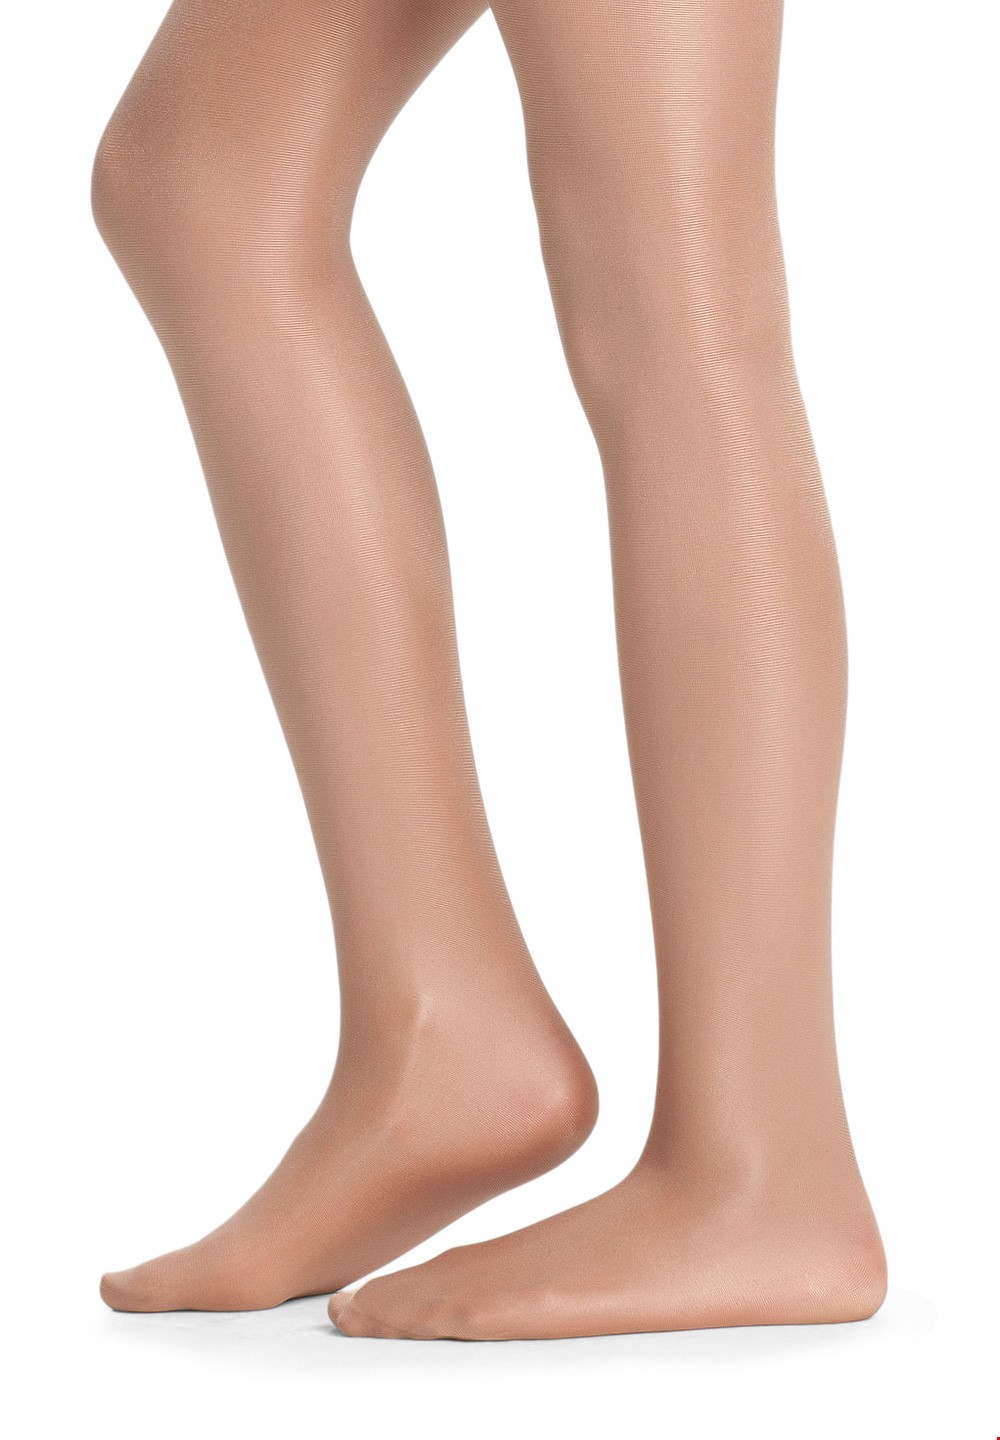 Girls Tights – Danskin Ultra Shimmery Tights Dance Tights Footed Children |